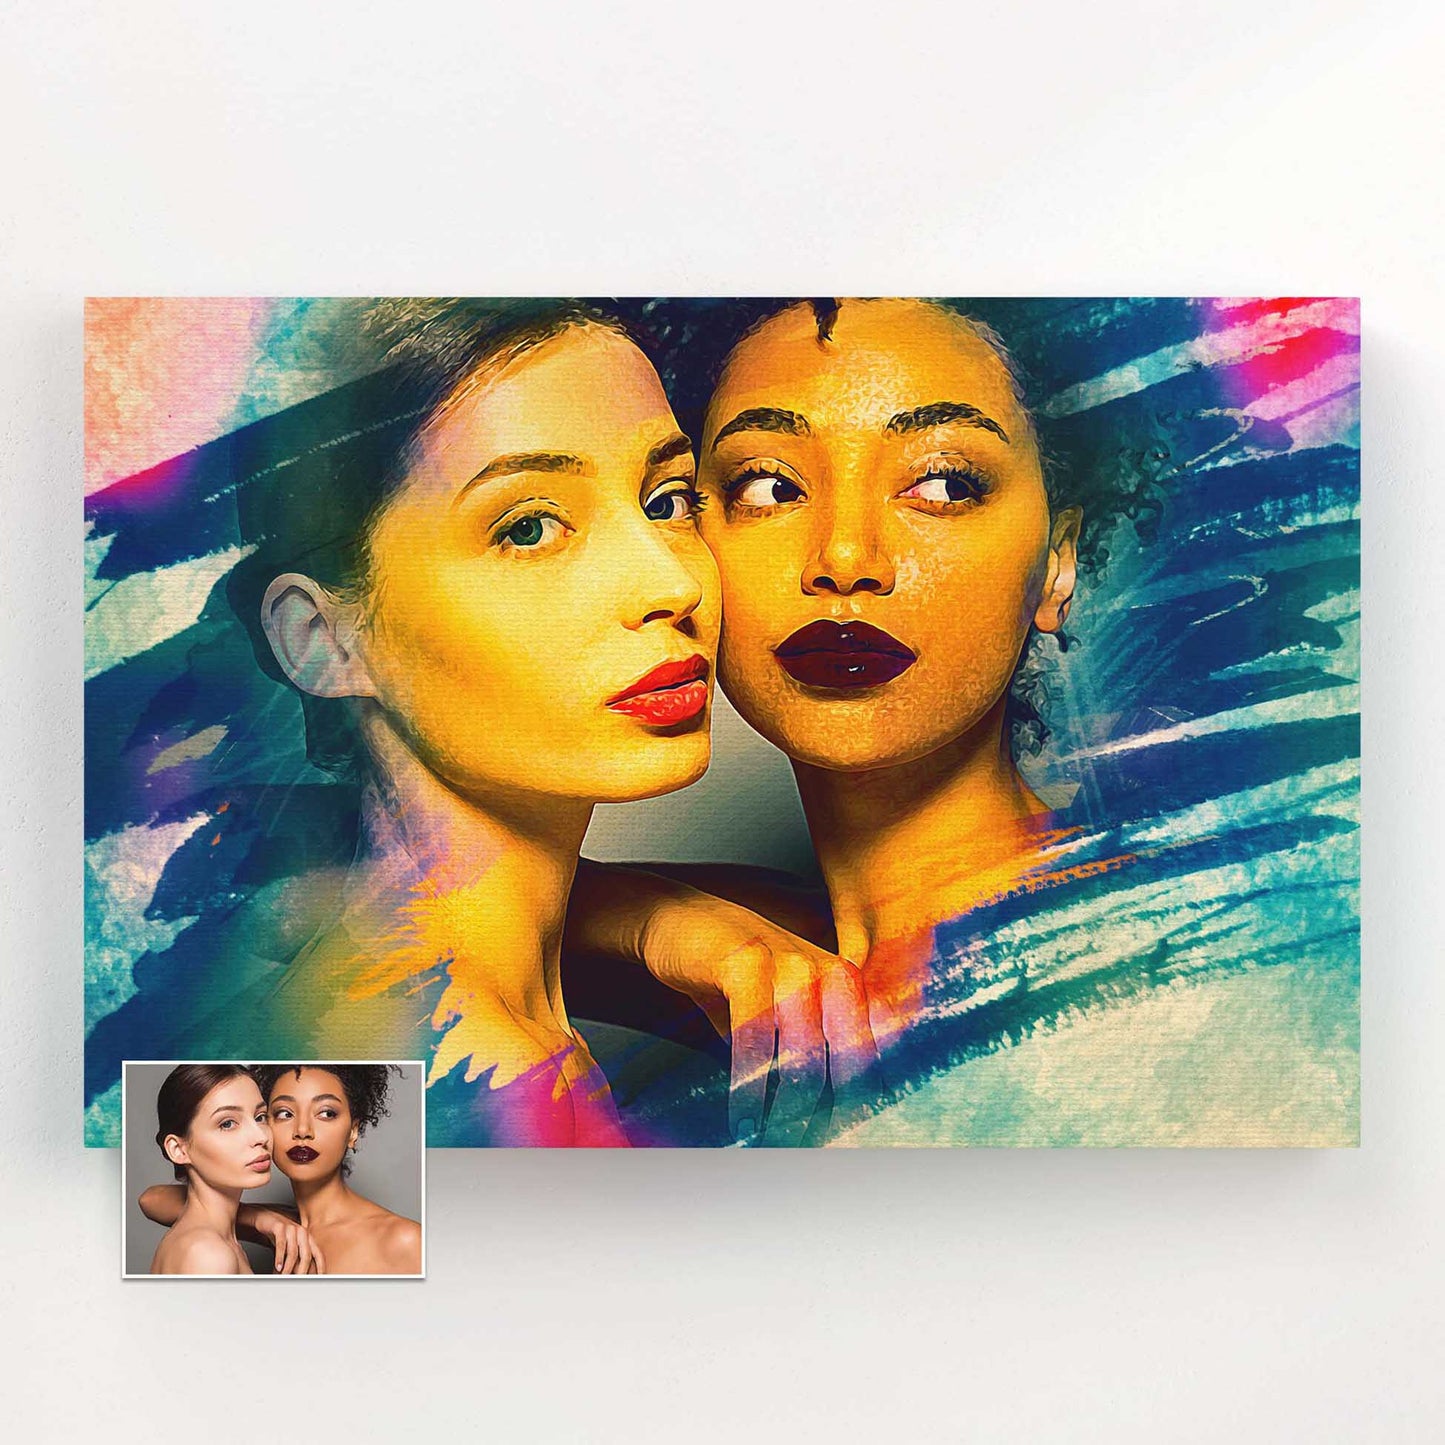 Turn your photo into a work of art with our Personalised Artistic Painting Canvas